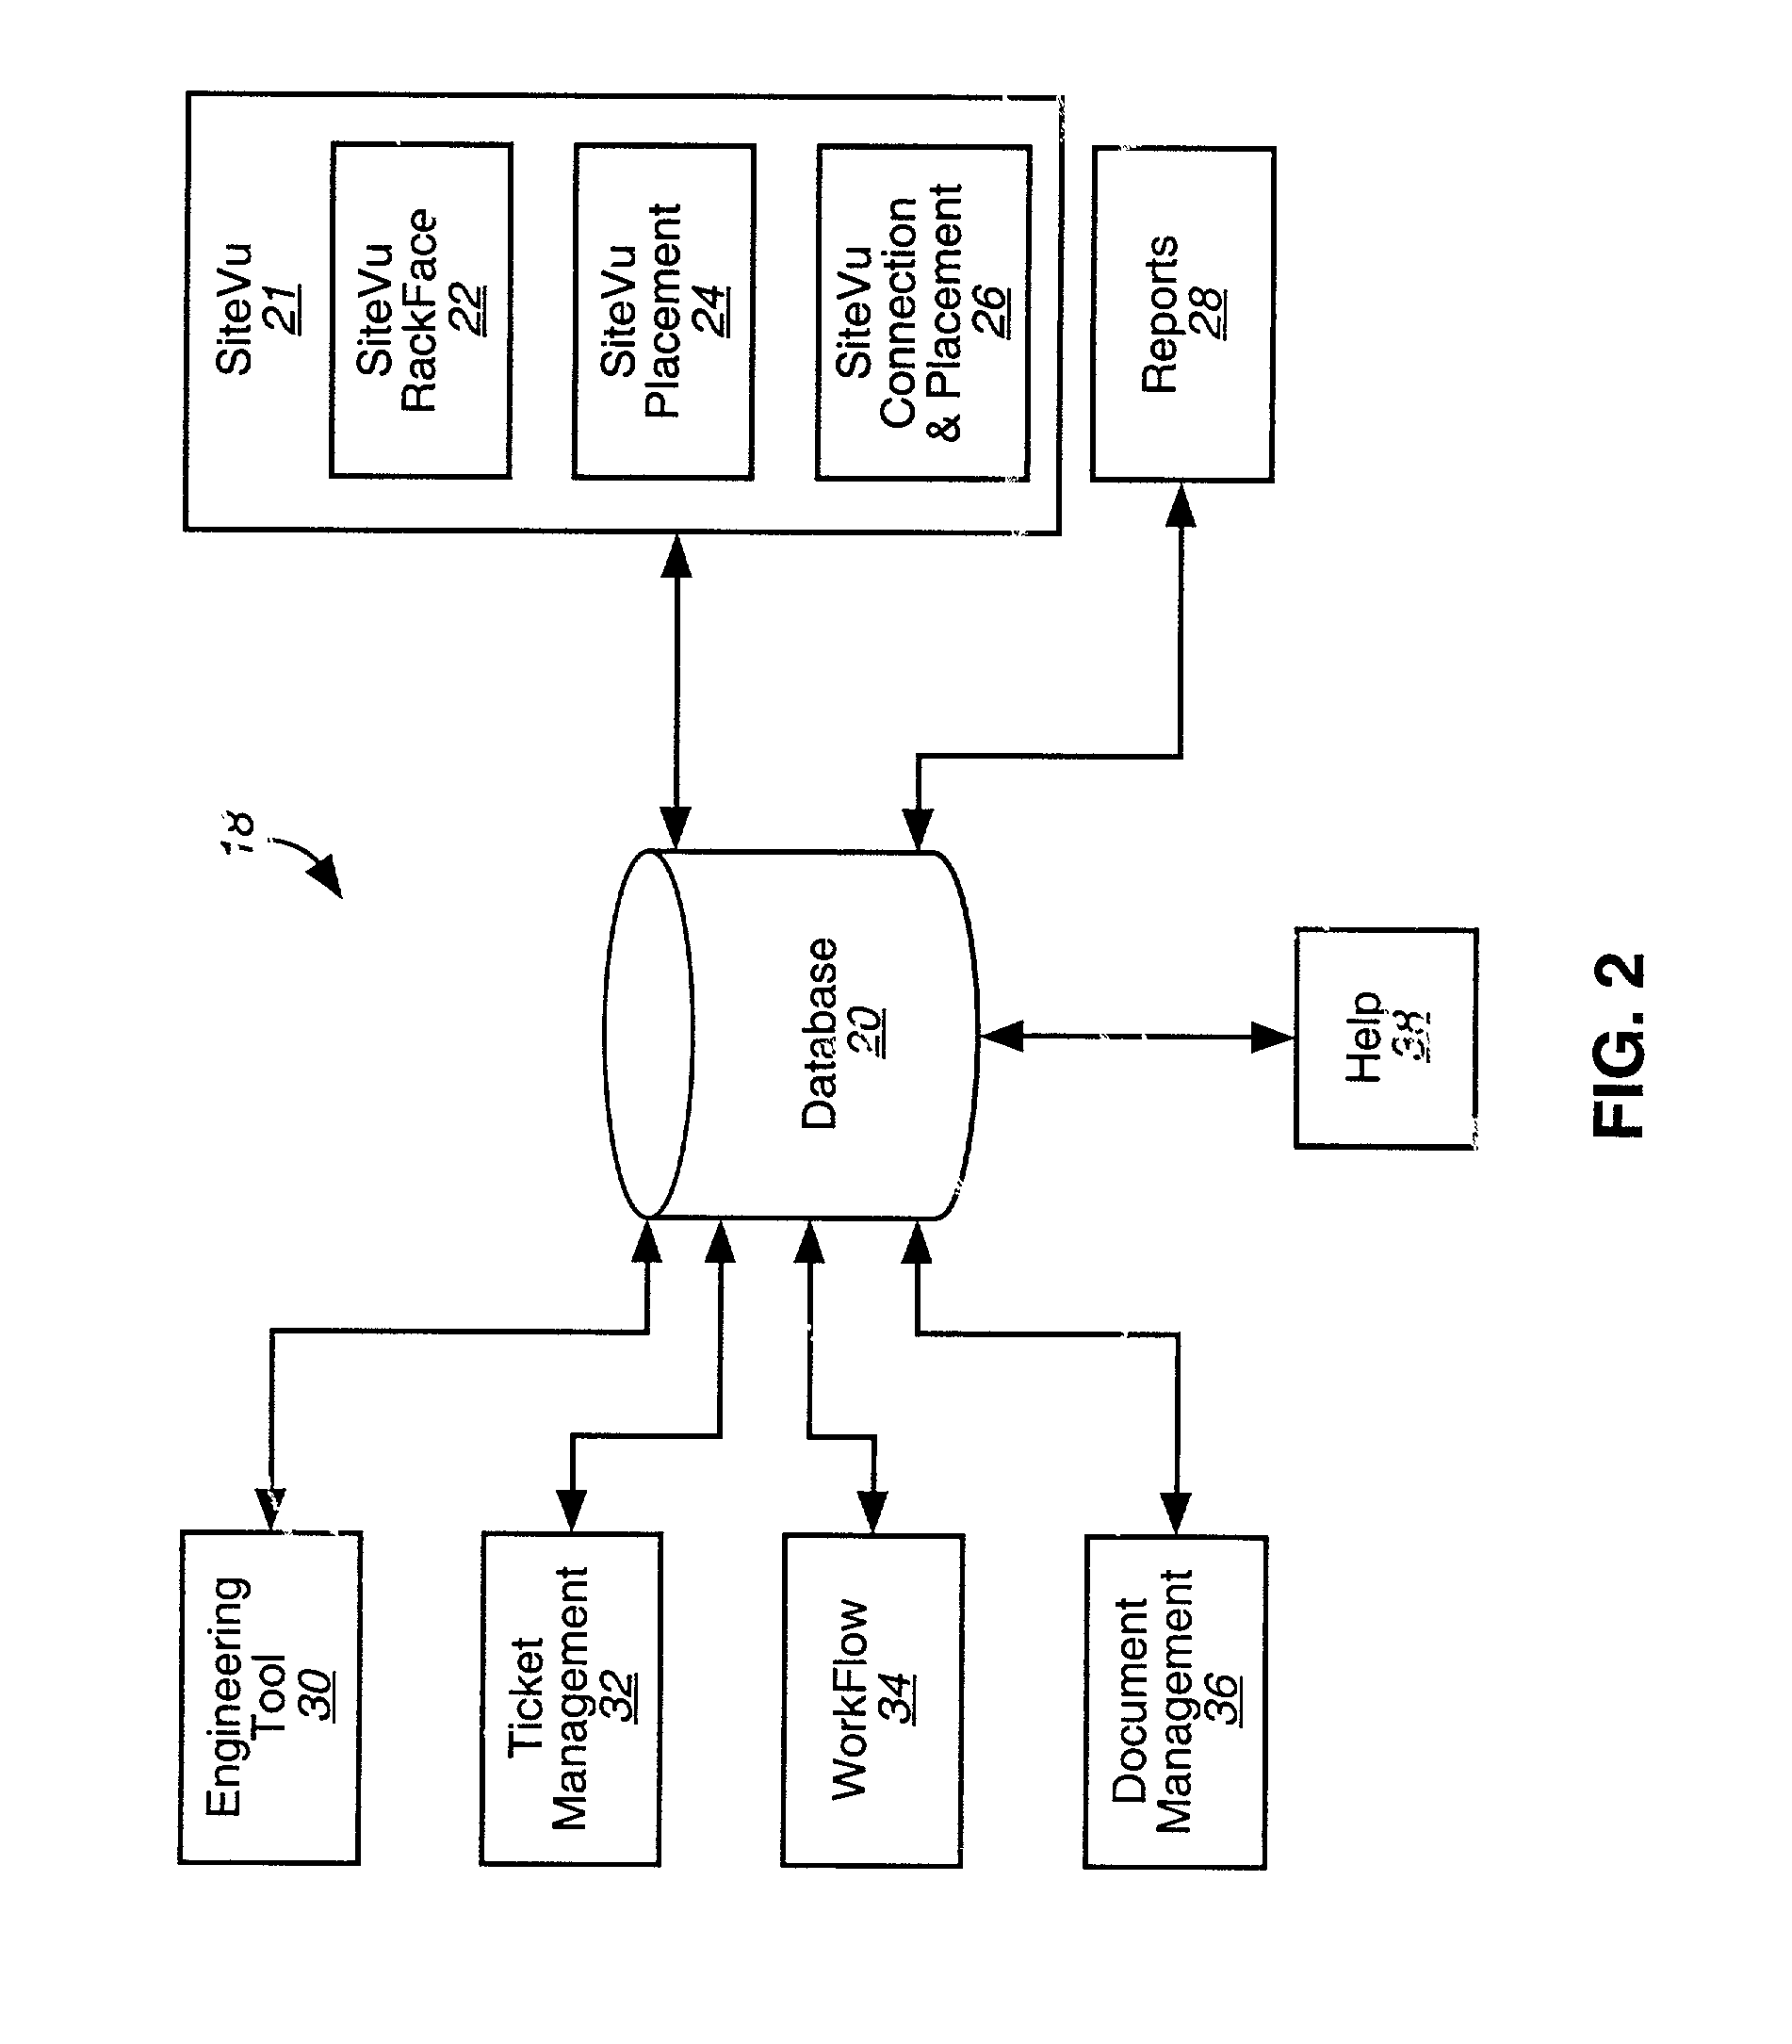 Method, system and program product for viewing and manipulating graphical objects representing hierarchically arranged elements of a modeled environment